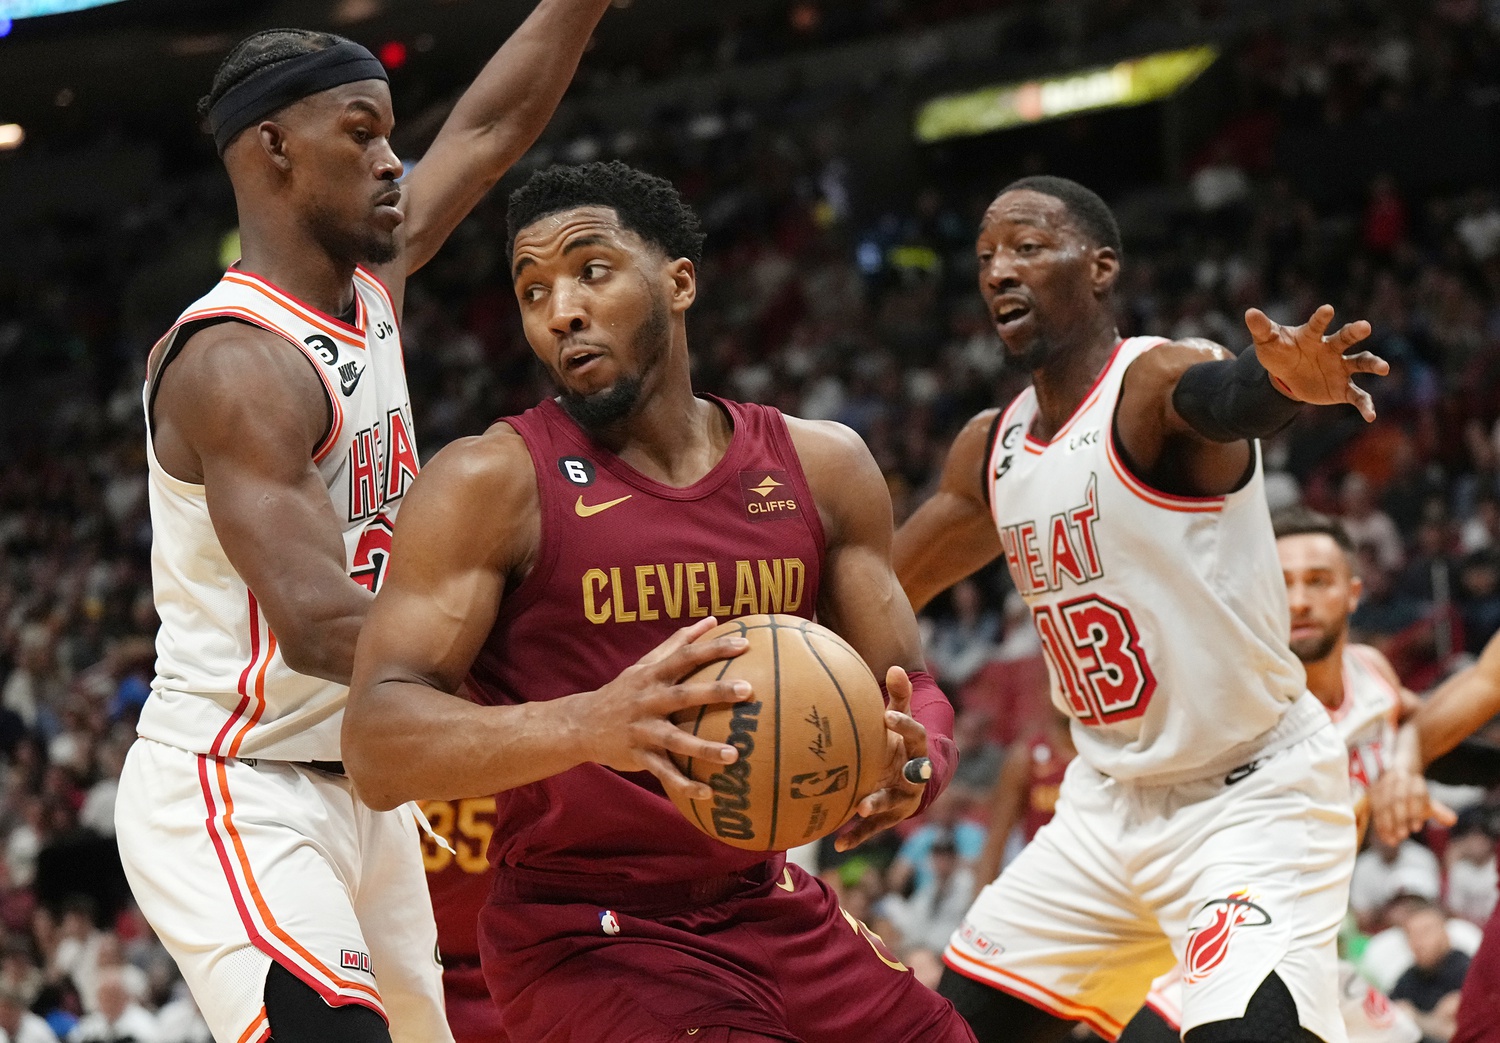 Donovan Mitchell has been linked to the Miami Heat in an off-season move.